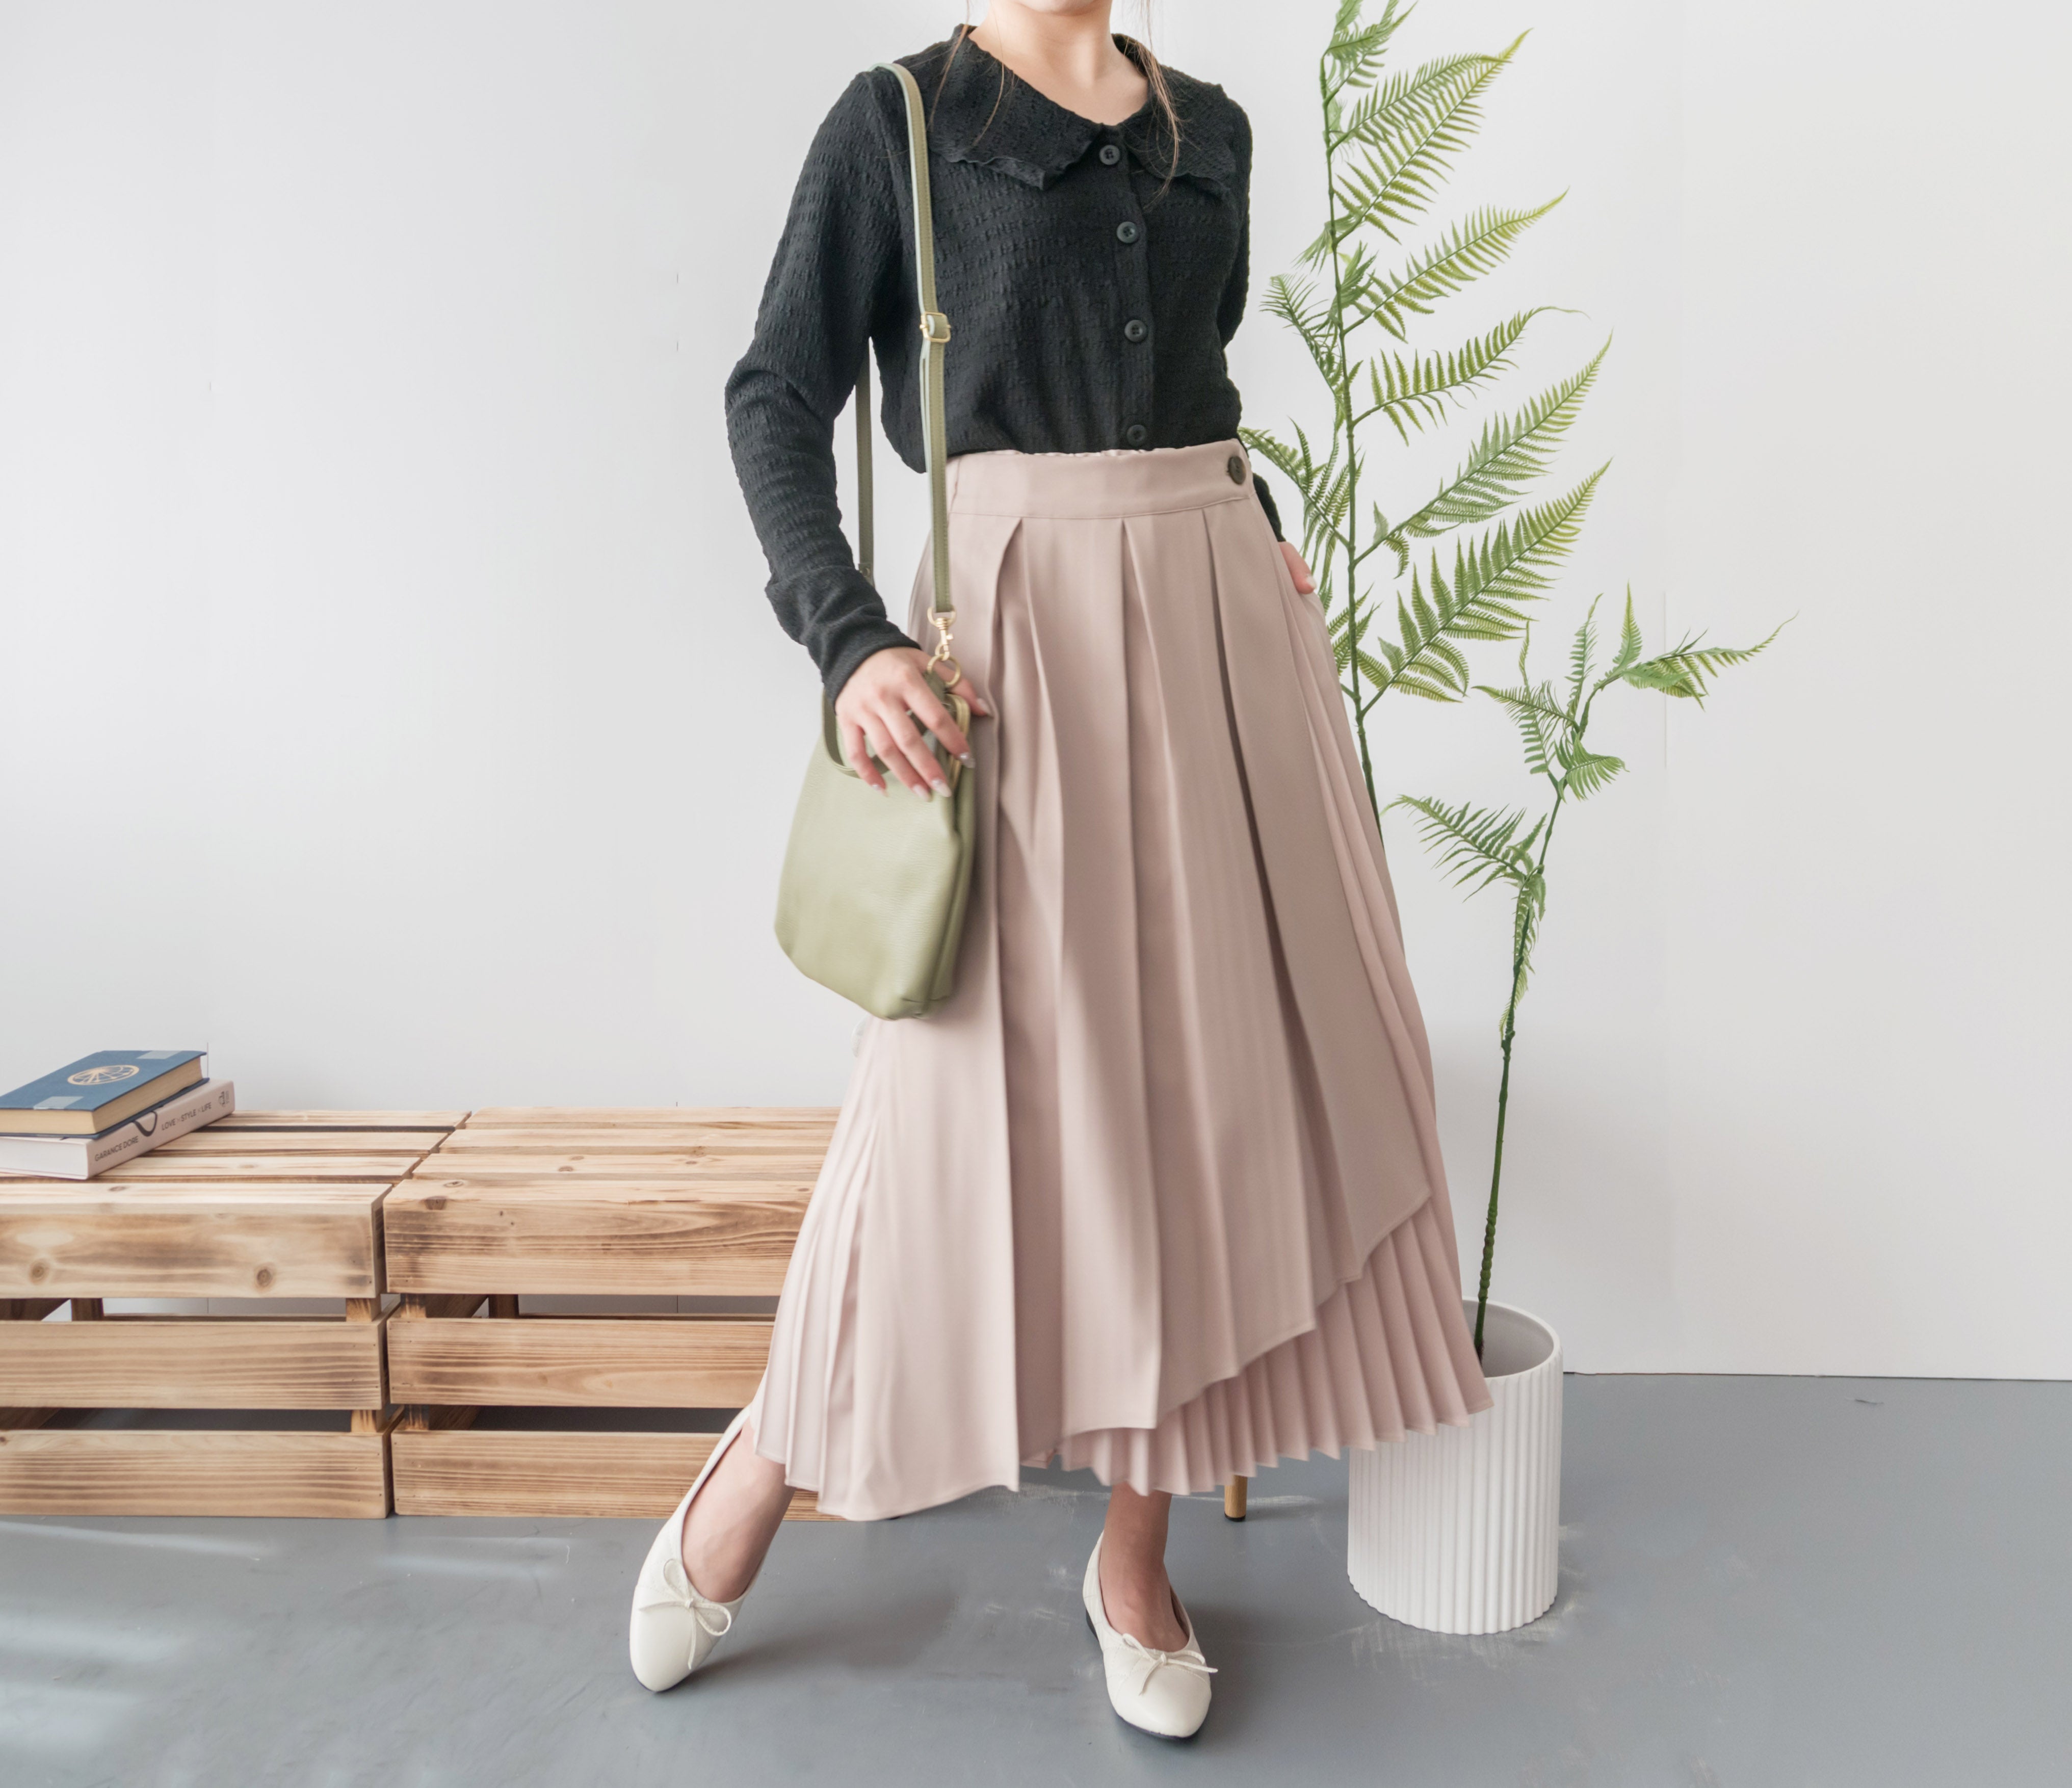 Spliced Pleated 雙色拼百褶口袋半身裙, Skirt/ SK8657 (深淺杏 Beige sold out)